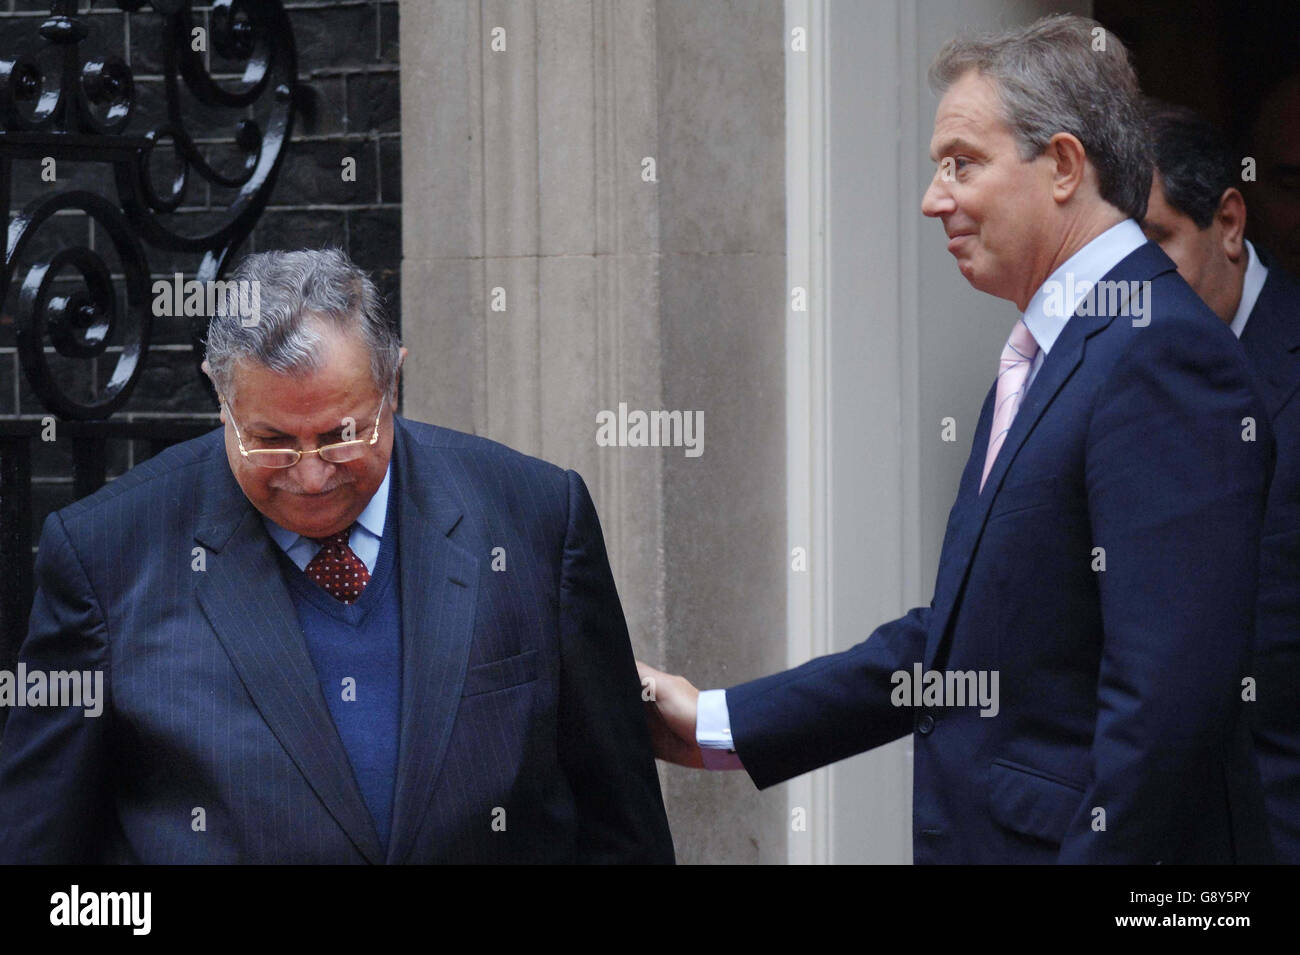 Britain's Prime Minister Tony Blair (R) with Iraqi president Jalal Talabani outside 10, Downing Street, central London, Thursday October 6, 2005. Blair met the Iraqi president to discuss preparations for the referendum on the new Iraqi constitution. The Iraqi leader is visiting London during his first official visit to Europe since taking office in April. The meeting comes a day after a senior British official blamed Iran's Revolutionary Guard for supplying the lethal explosive technology responsible for killing British soldiers in Iraq. The official said that there was evidence that the Stock Photo